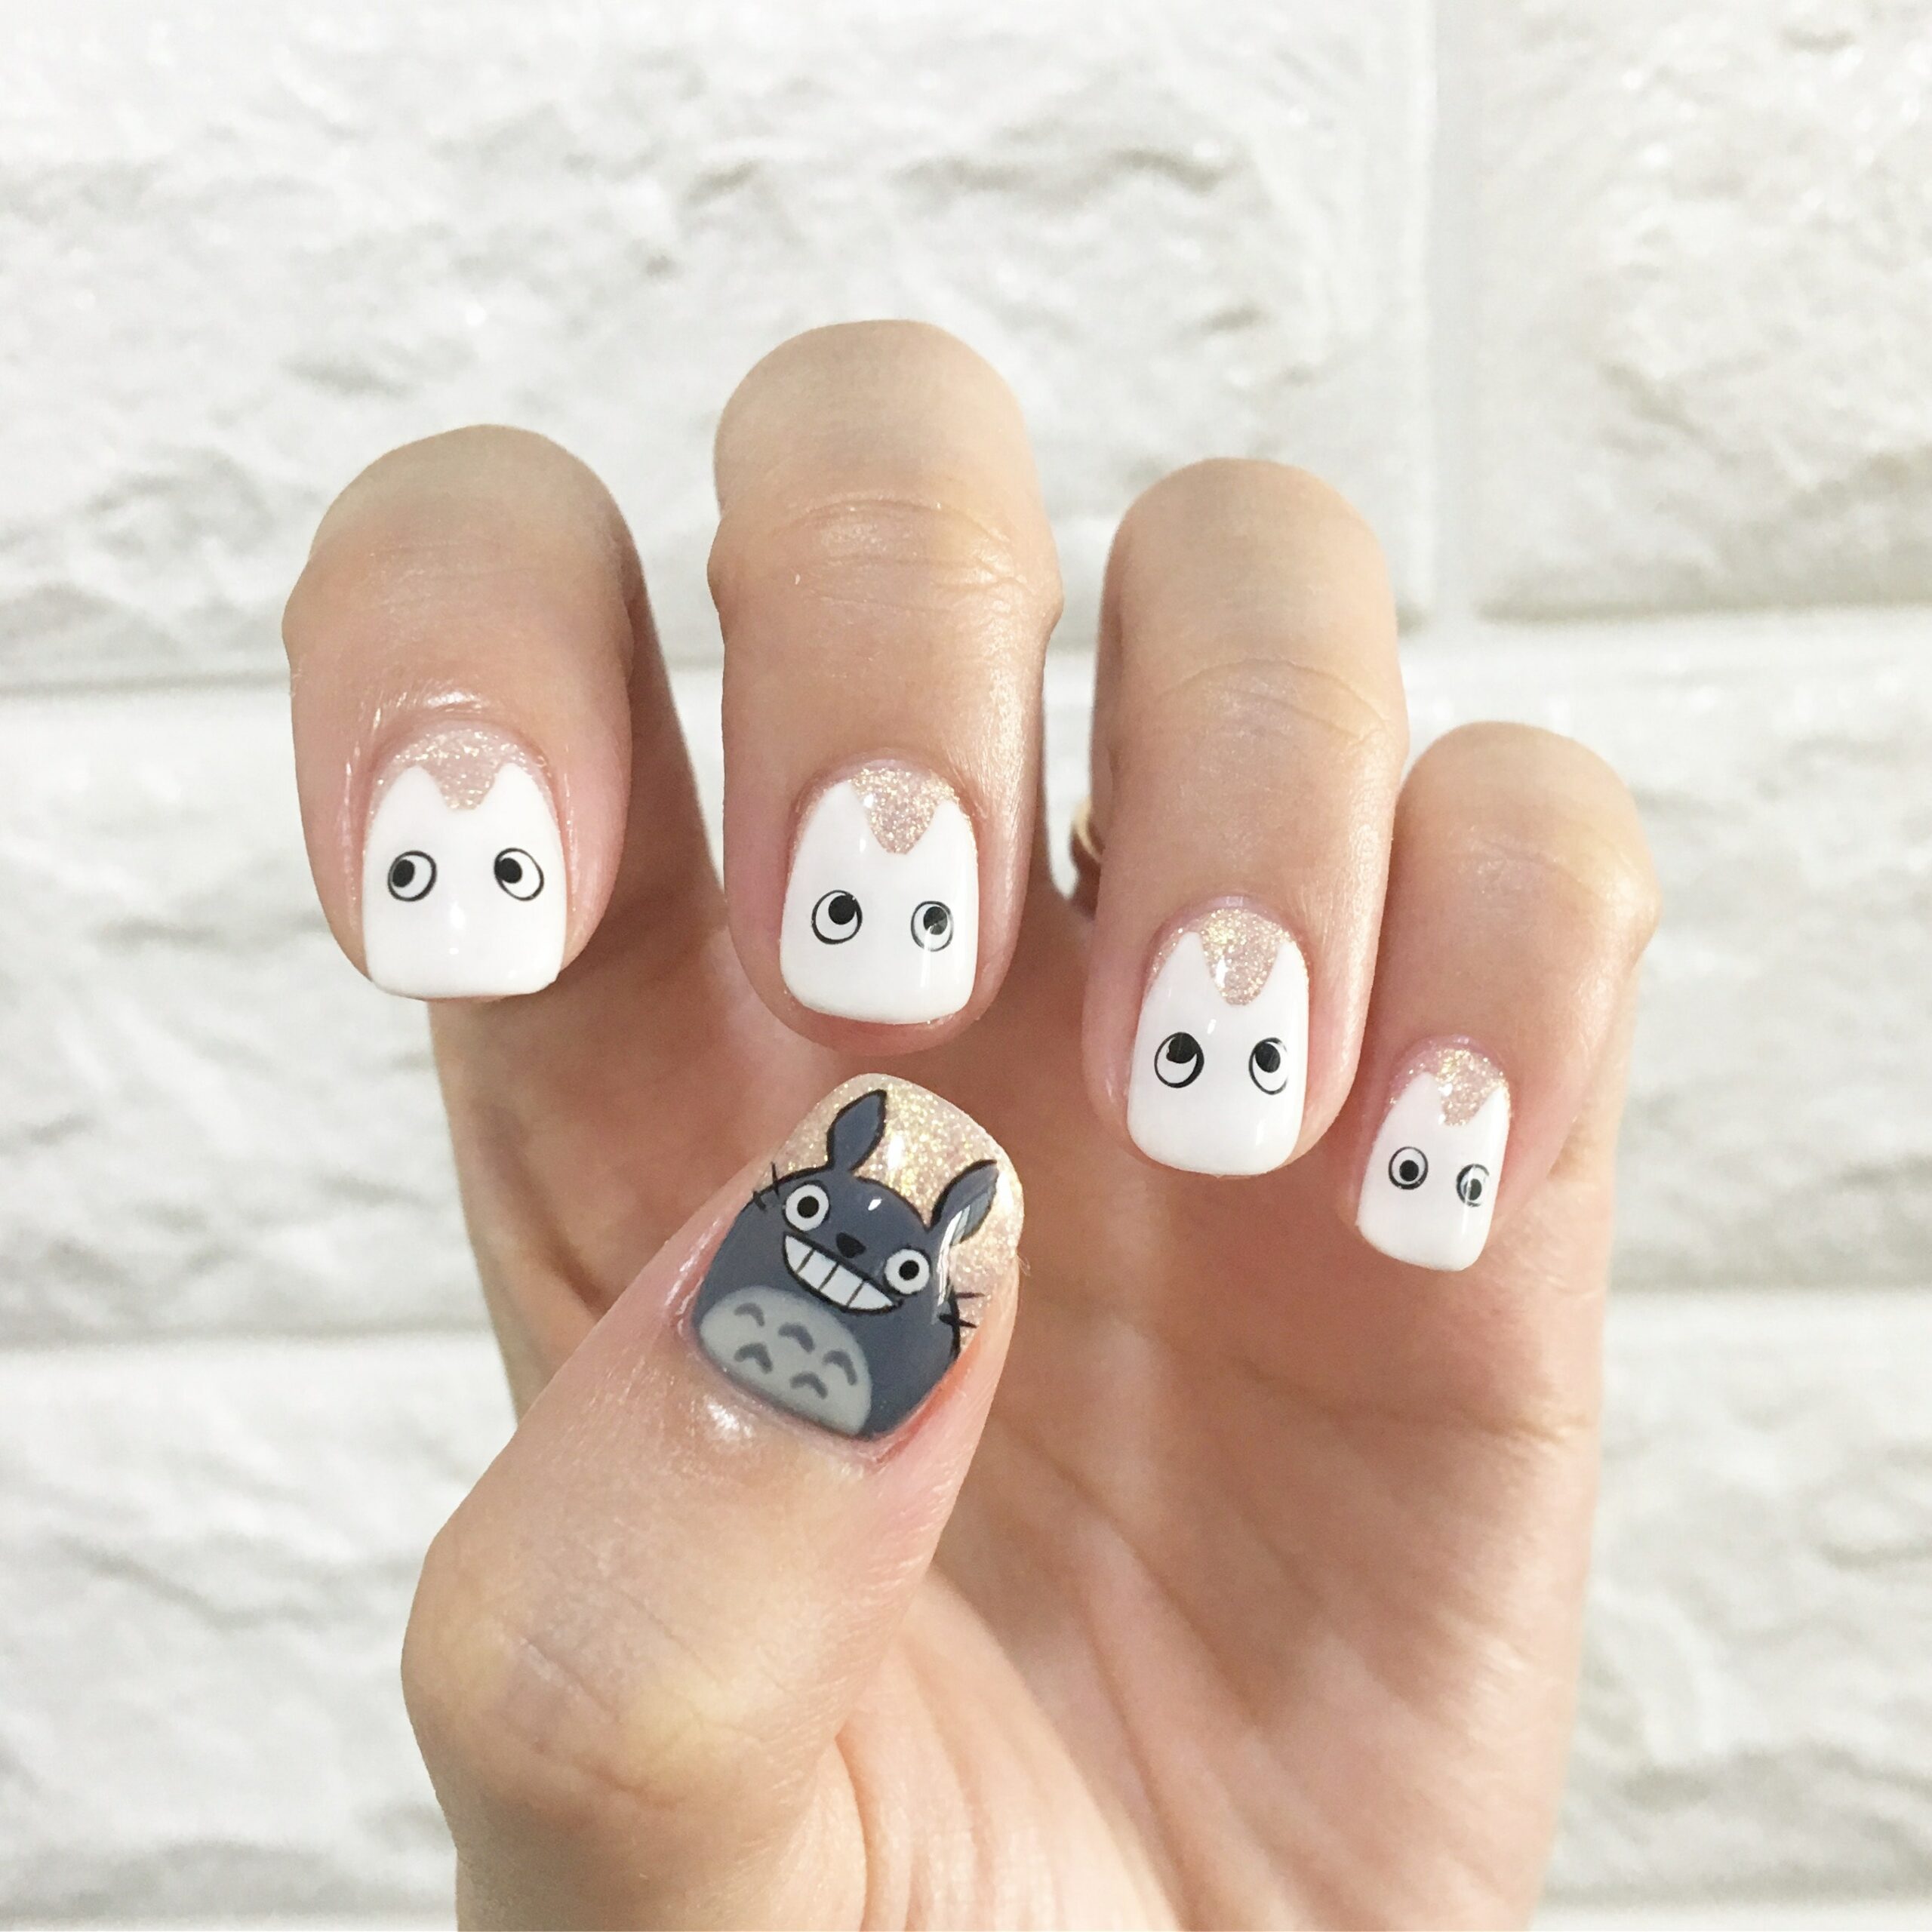 Korean Nail Art is Taking Over The World! - KoreaProductPost